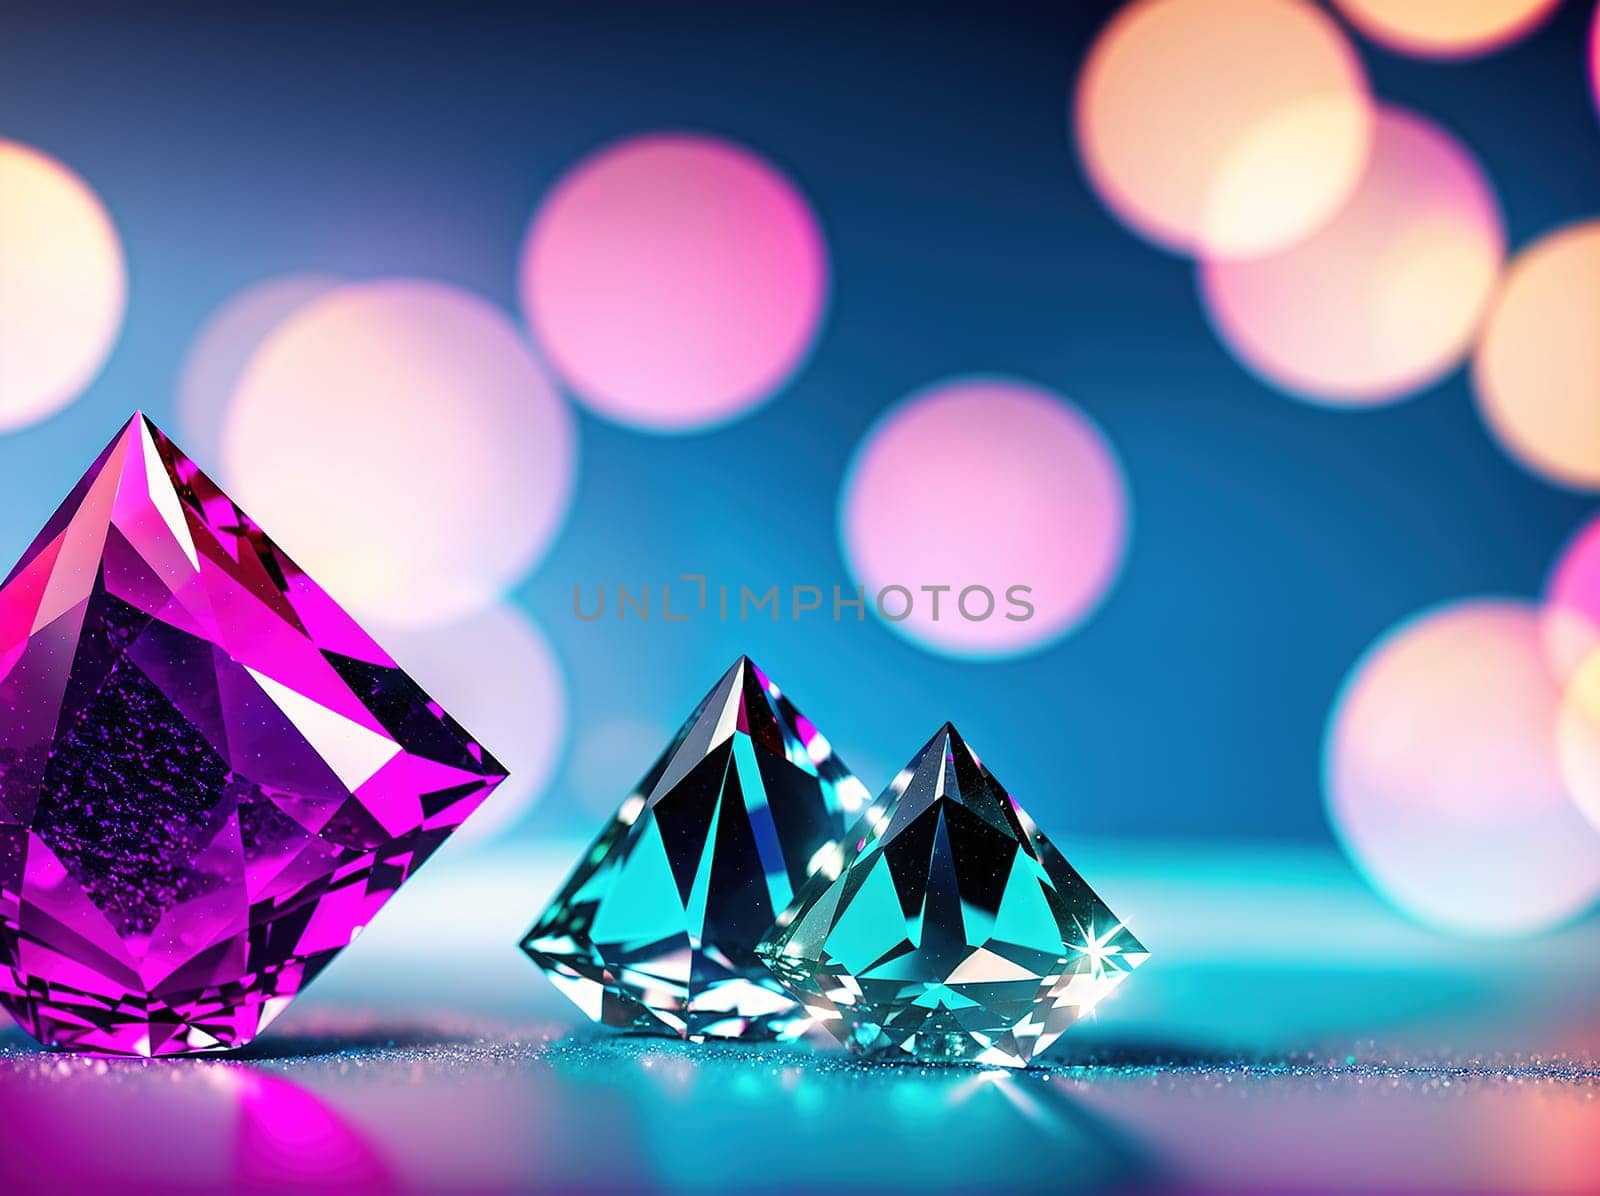 The image is a 3D rendering of a pink diamond on a white background with a blurred background.